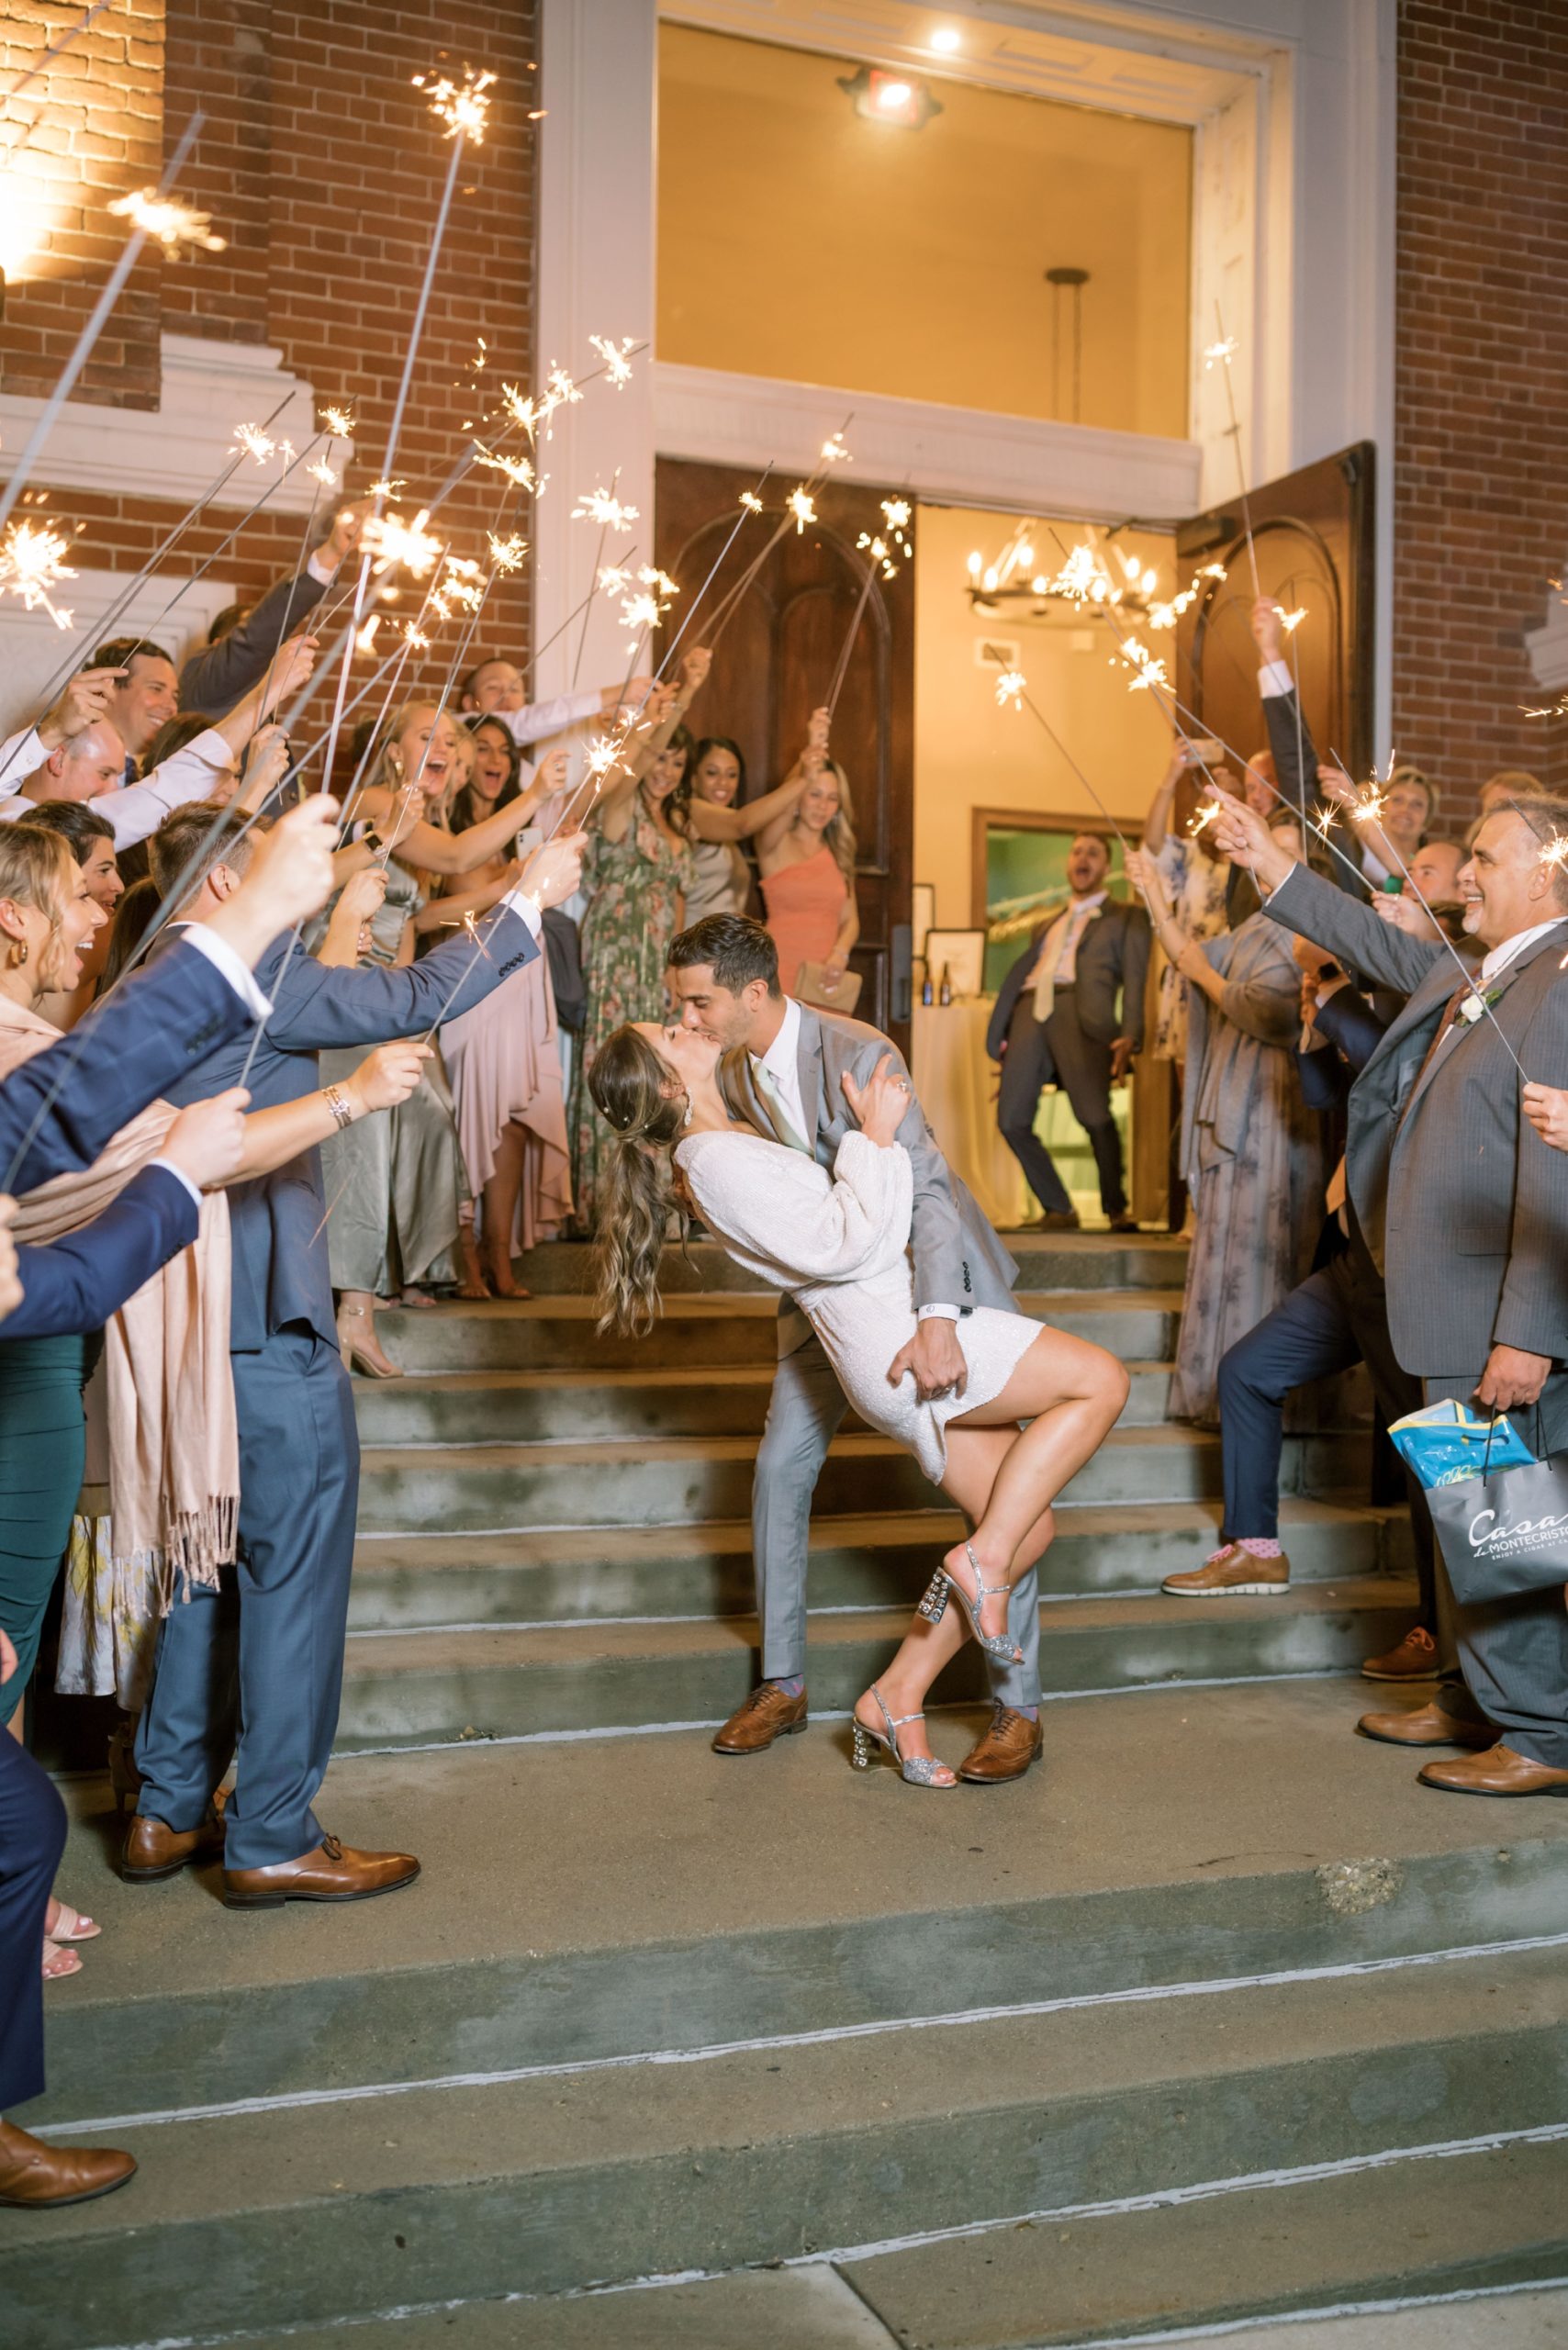 Photo of a bride and groom exiting their wedding while their guests hold sparklers for the sparkler send-off.